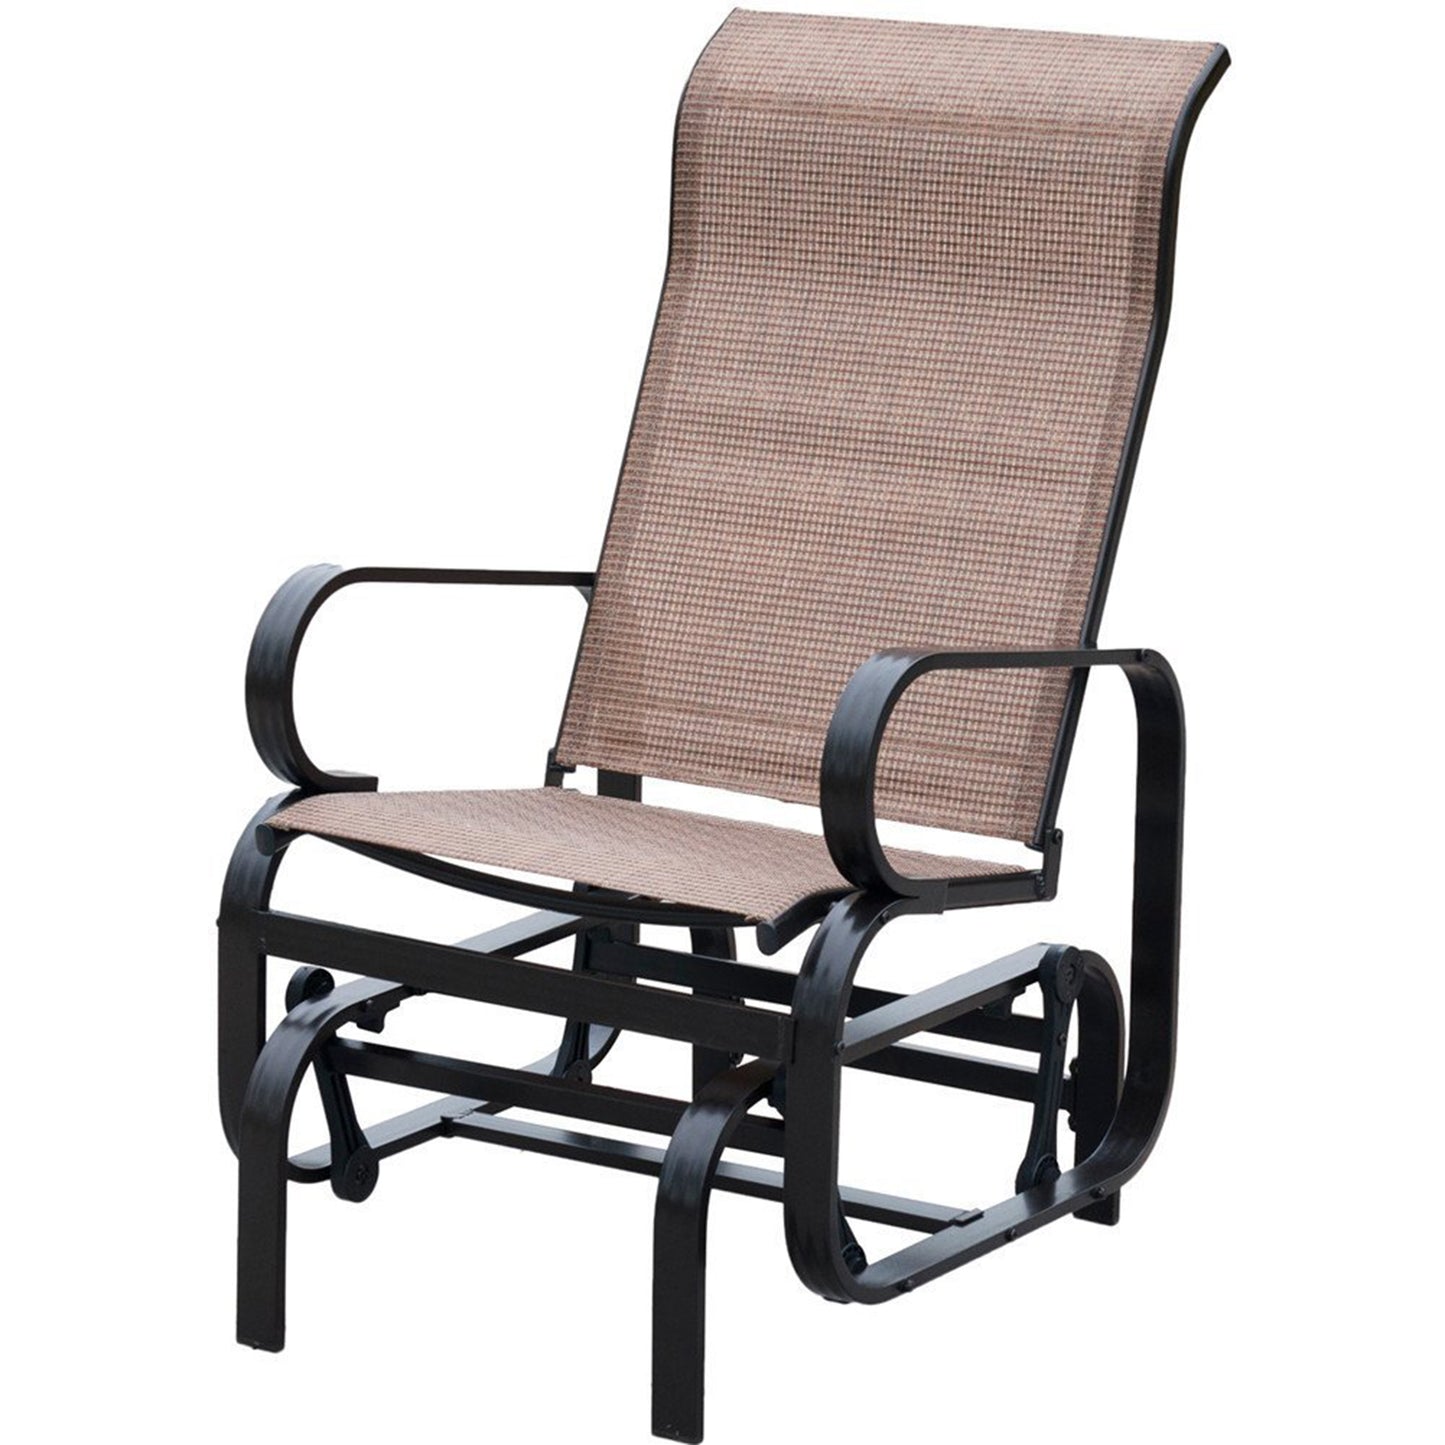 Outdoor Porch Glider Patio Swing Rocking Lounge Chair with Powder Coated Sturdy Aluminum Frame Support for Outdoor Backyard; Beside Pool; Lawn;  Textilene